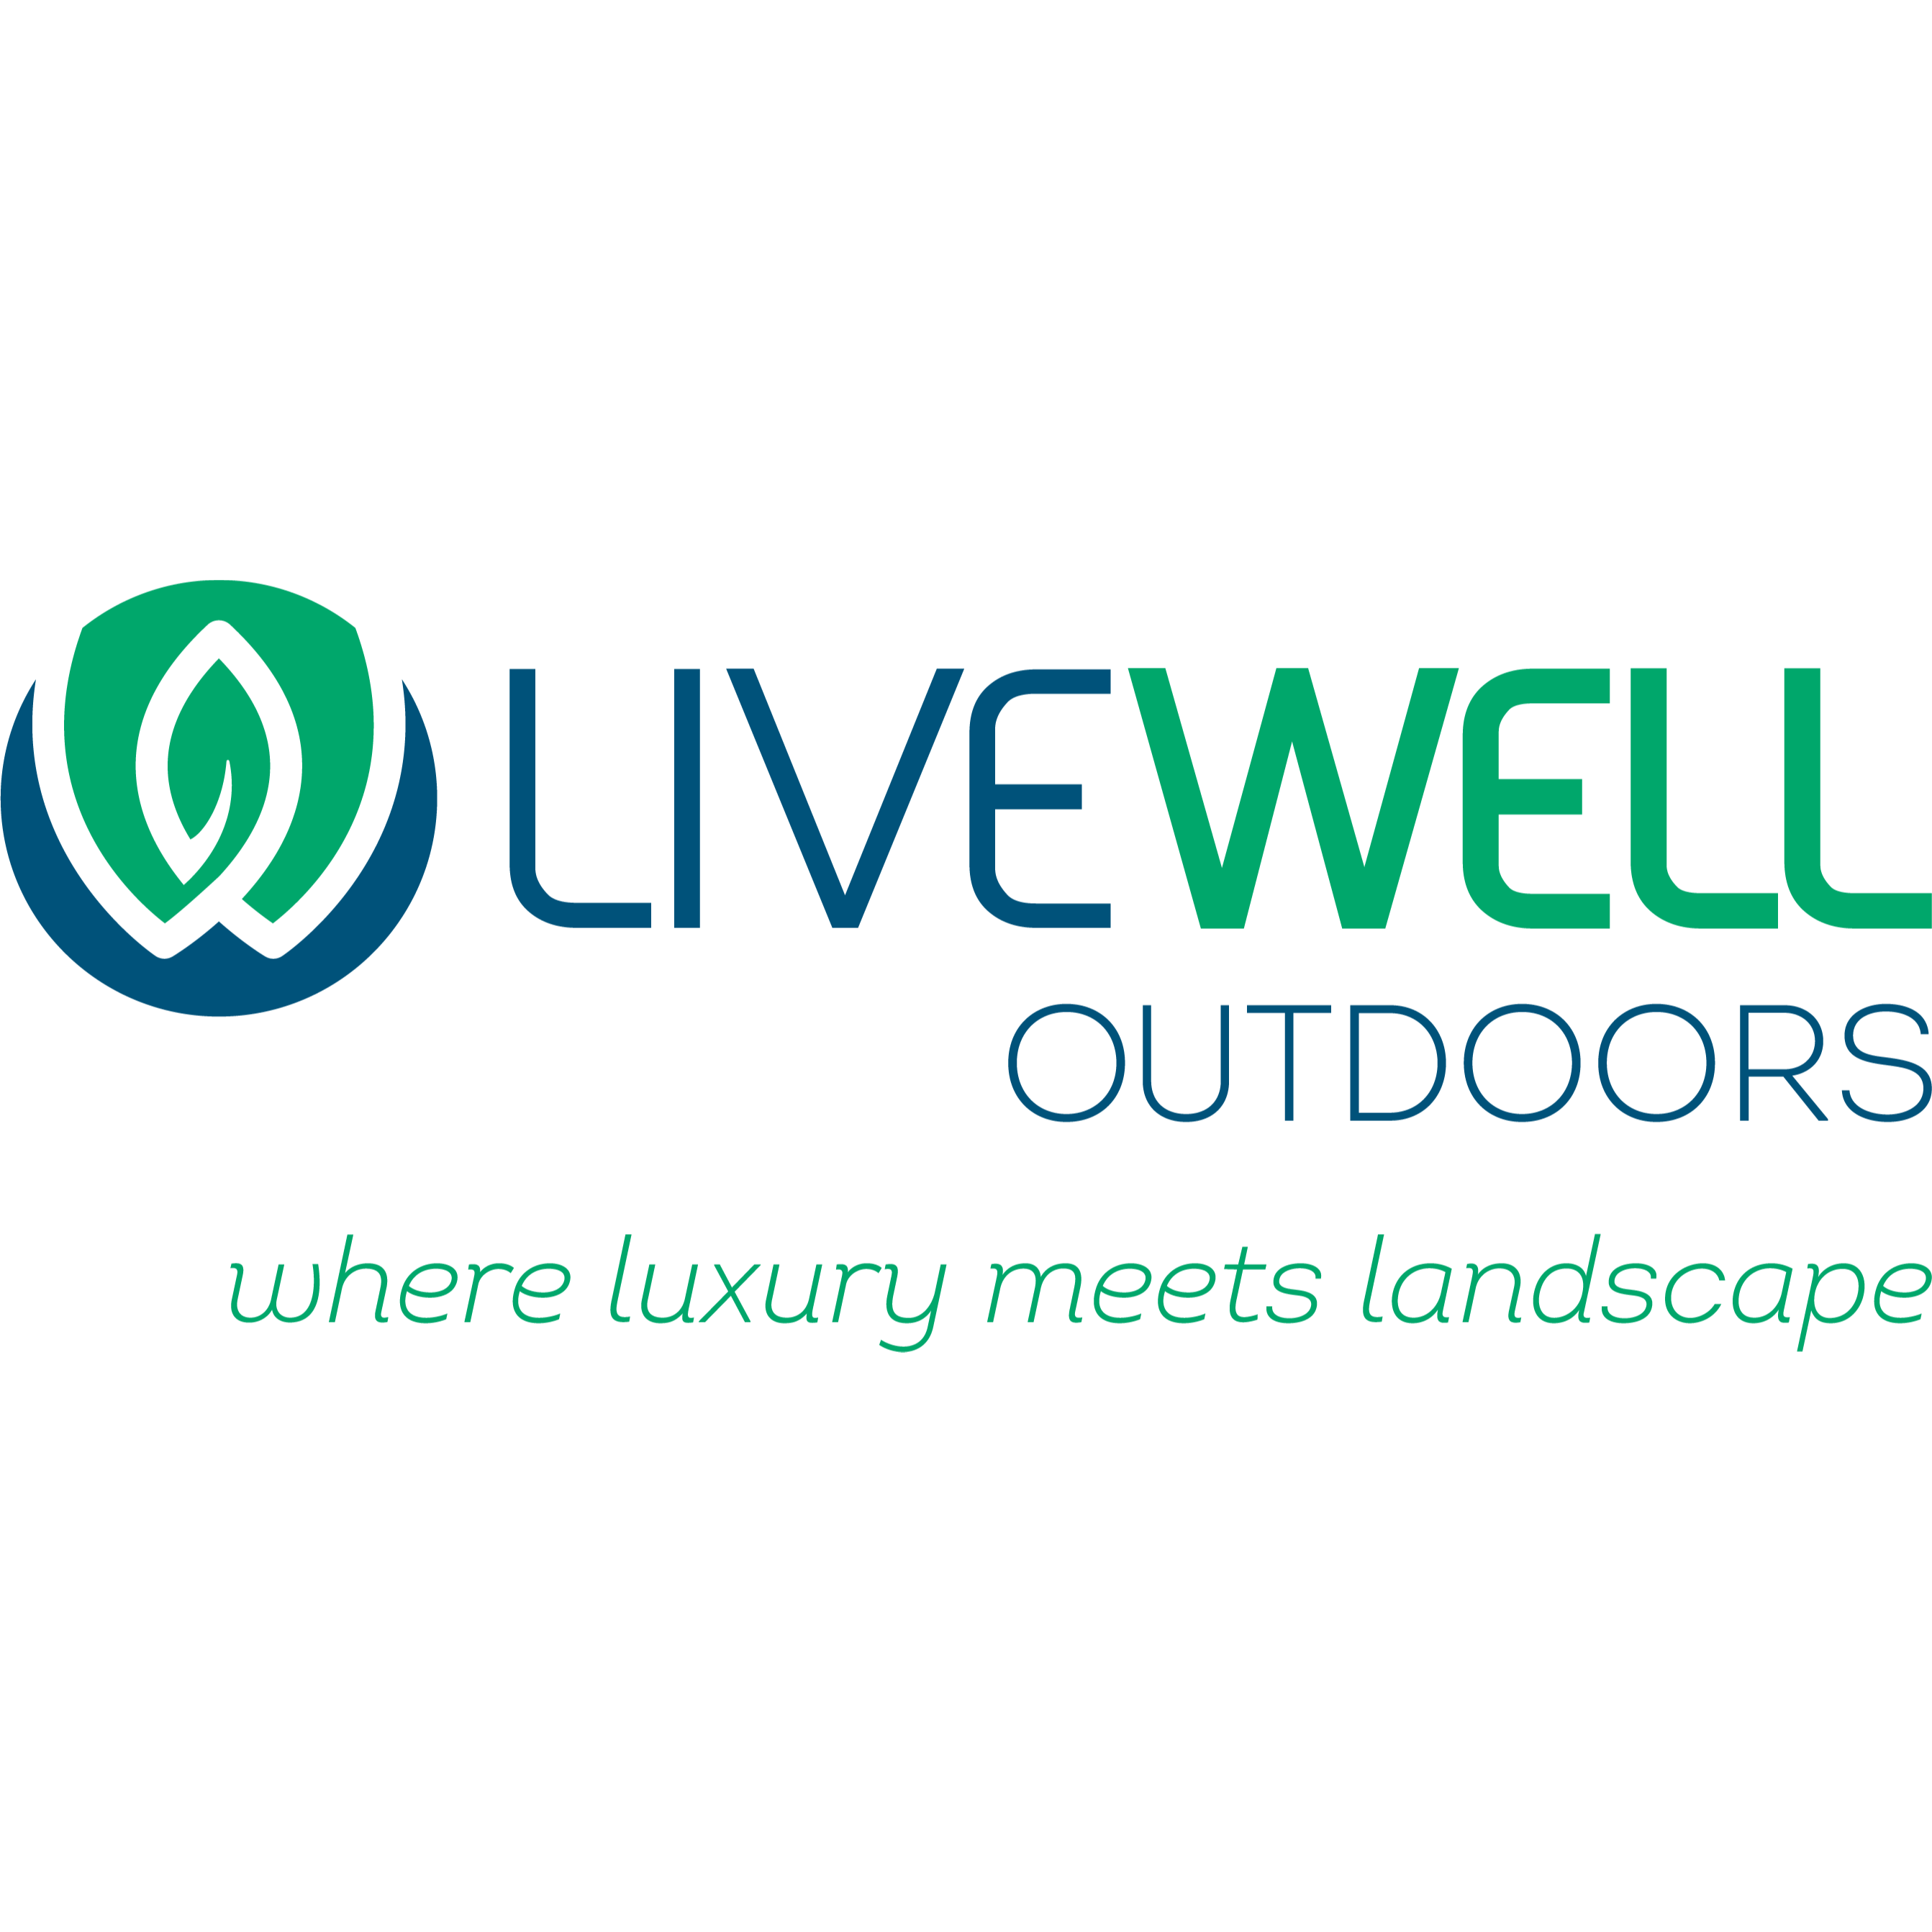 LiveWell Outdoors